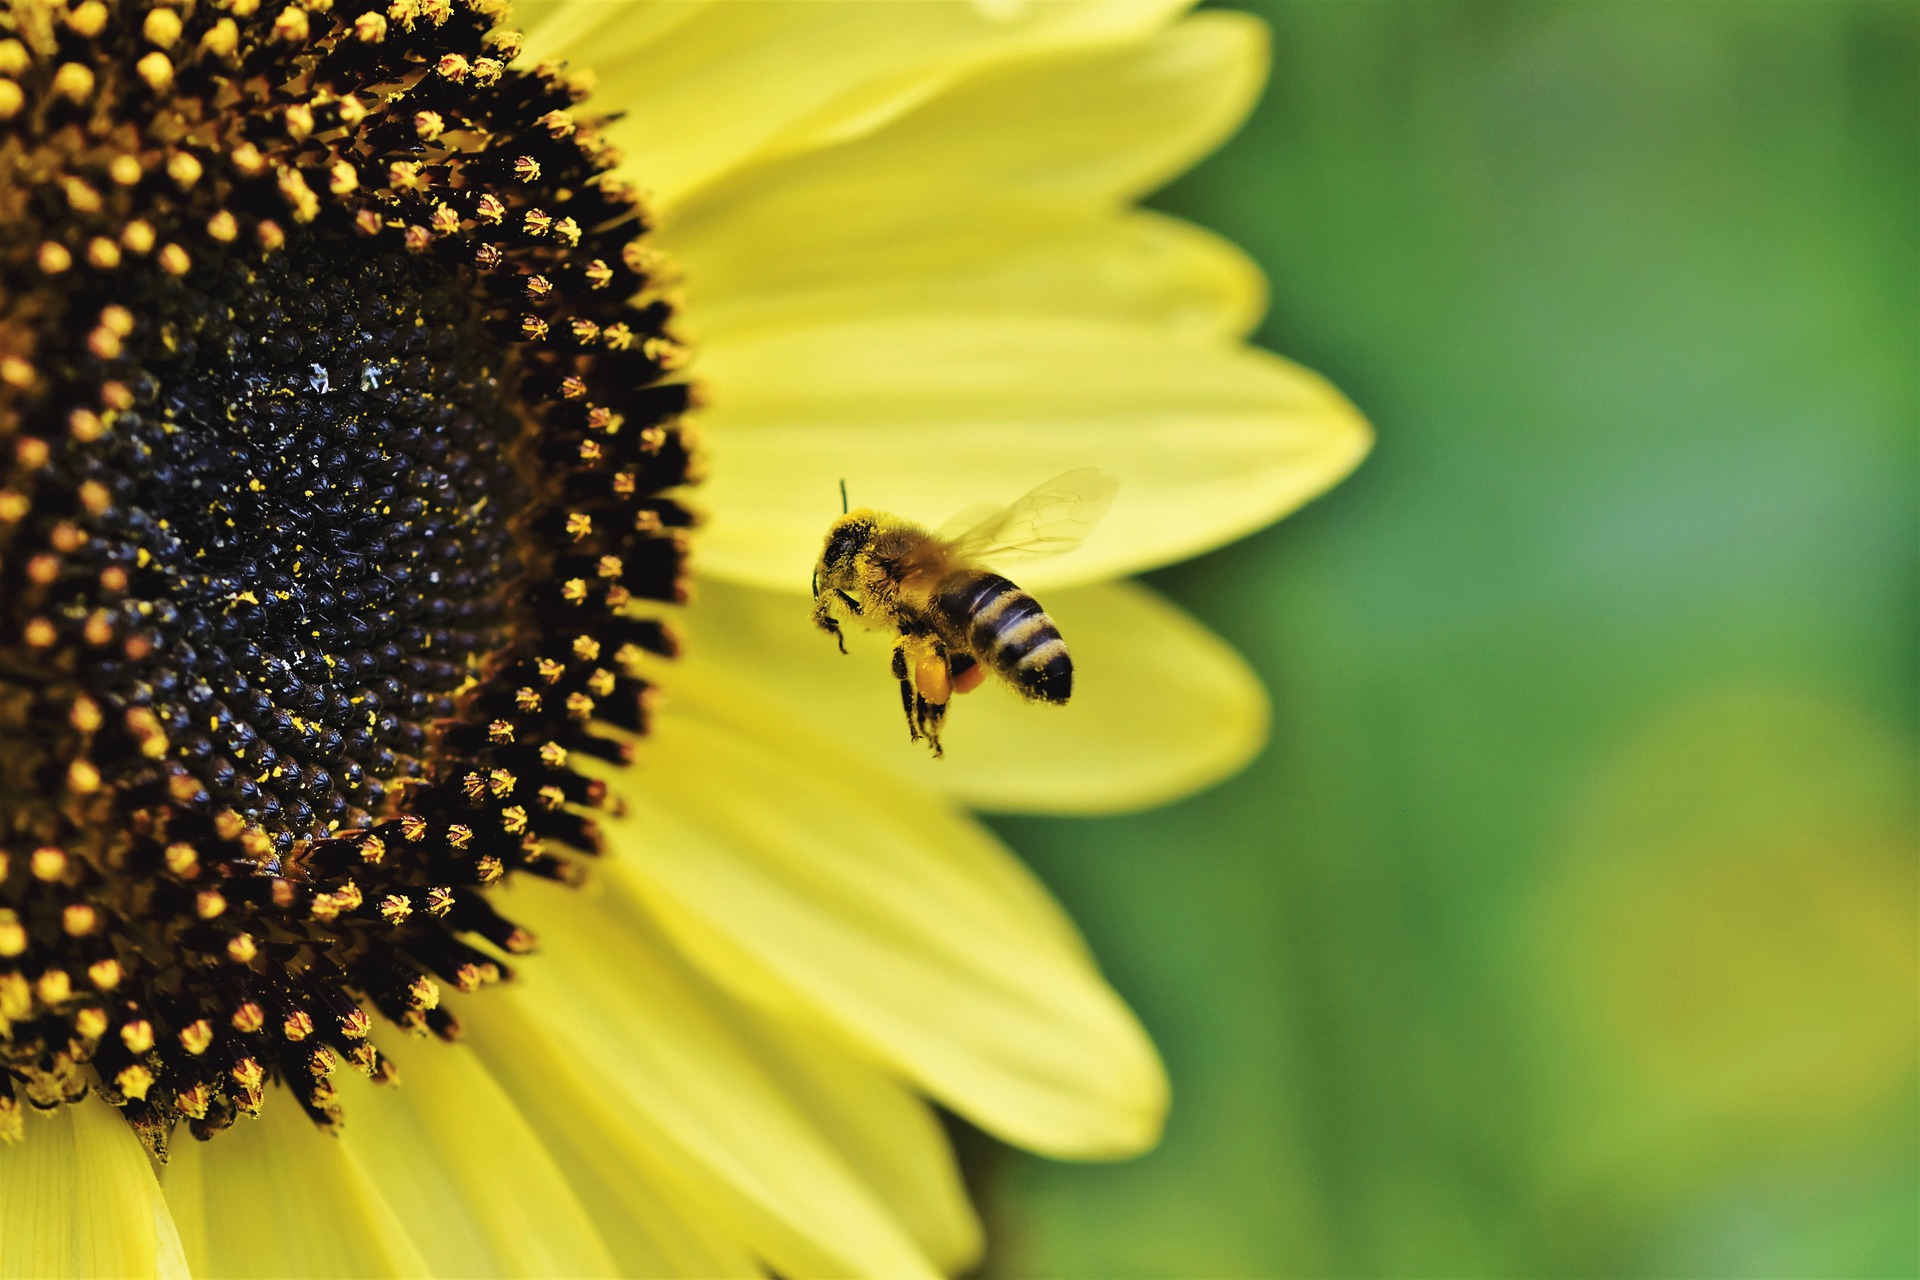 A  close-up of a bee flying to pollinate a sunflower